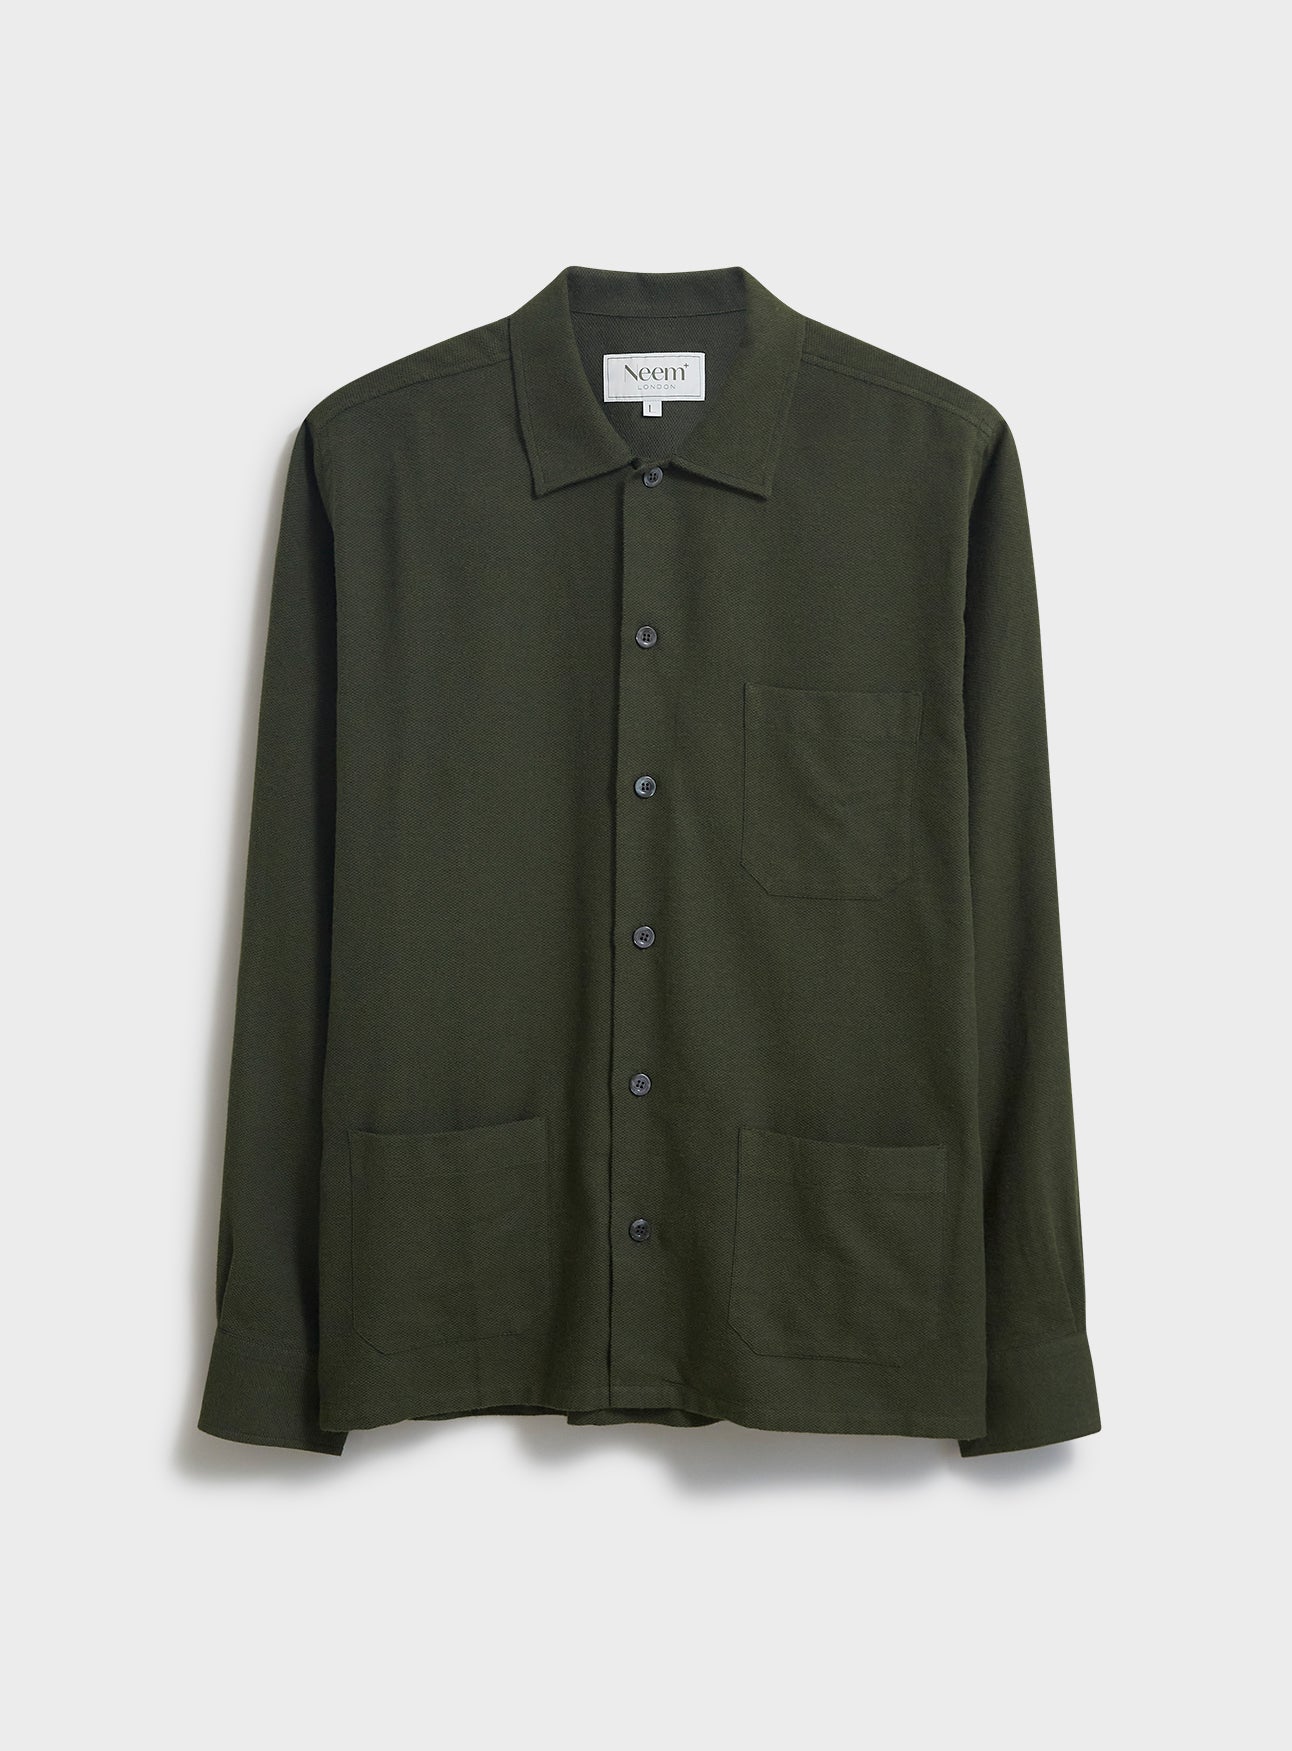 Recycled Italian Green Flannel shirt jacket